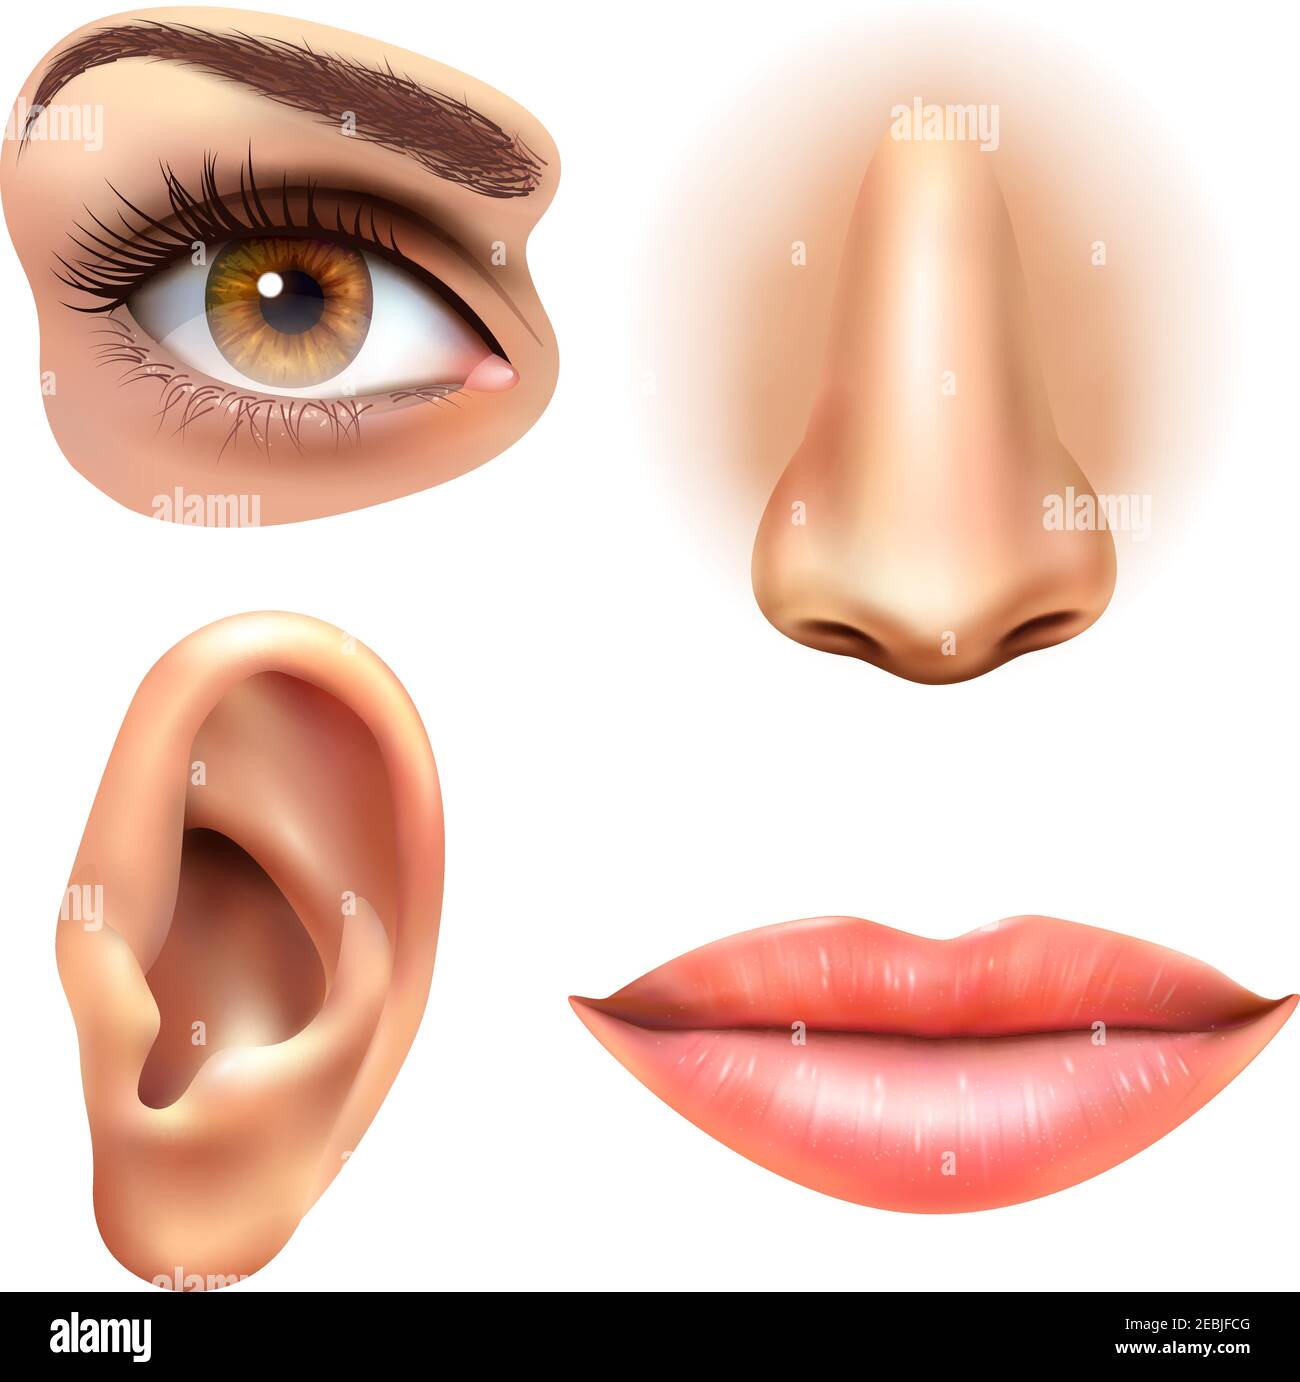 Human face parts 4 sense organs icons square collection of eye nose mouth and ear realistic vector illustration Stock Vector